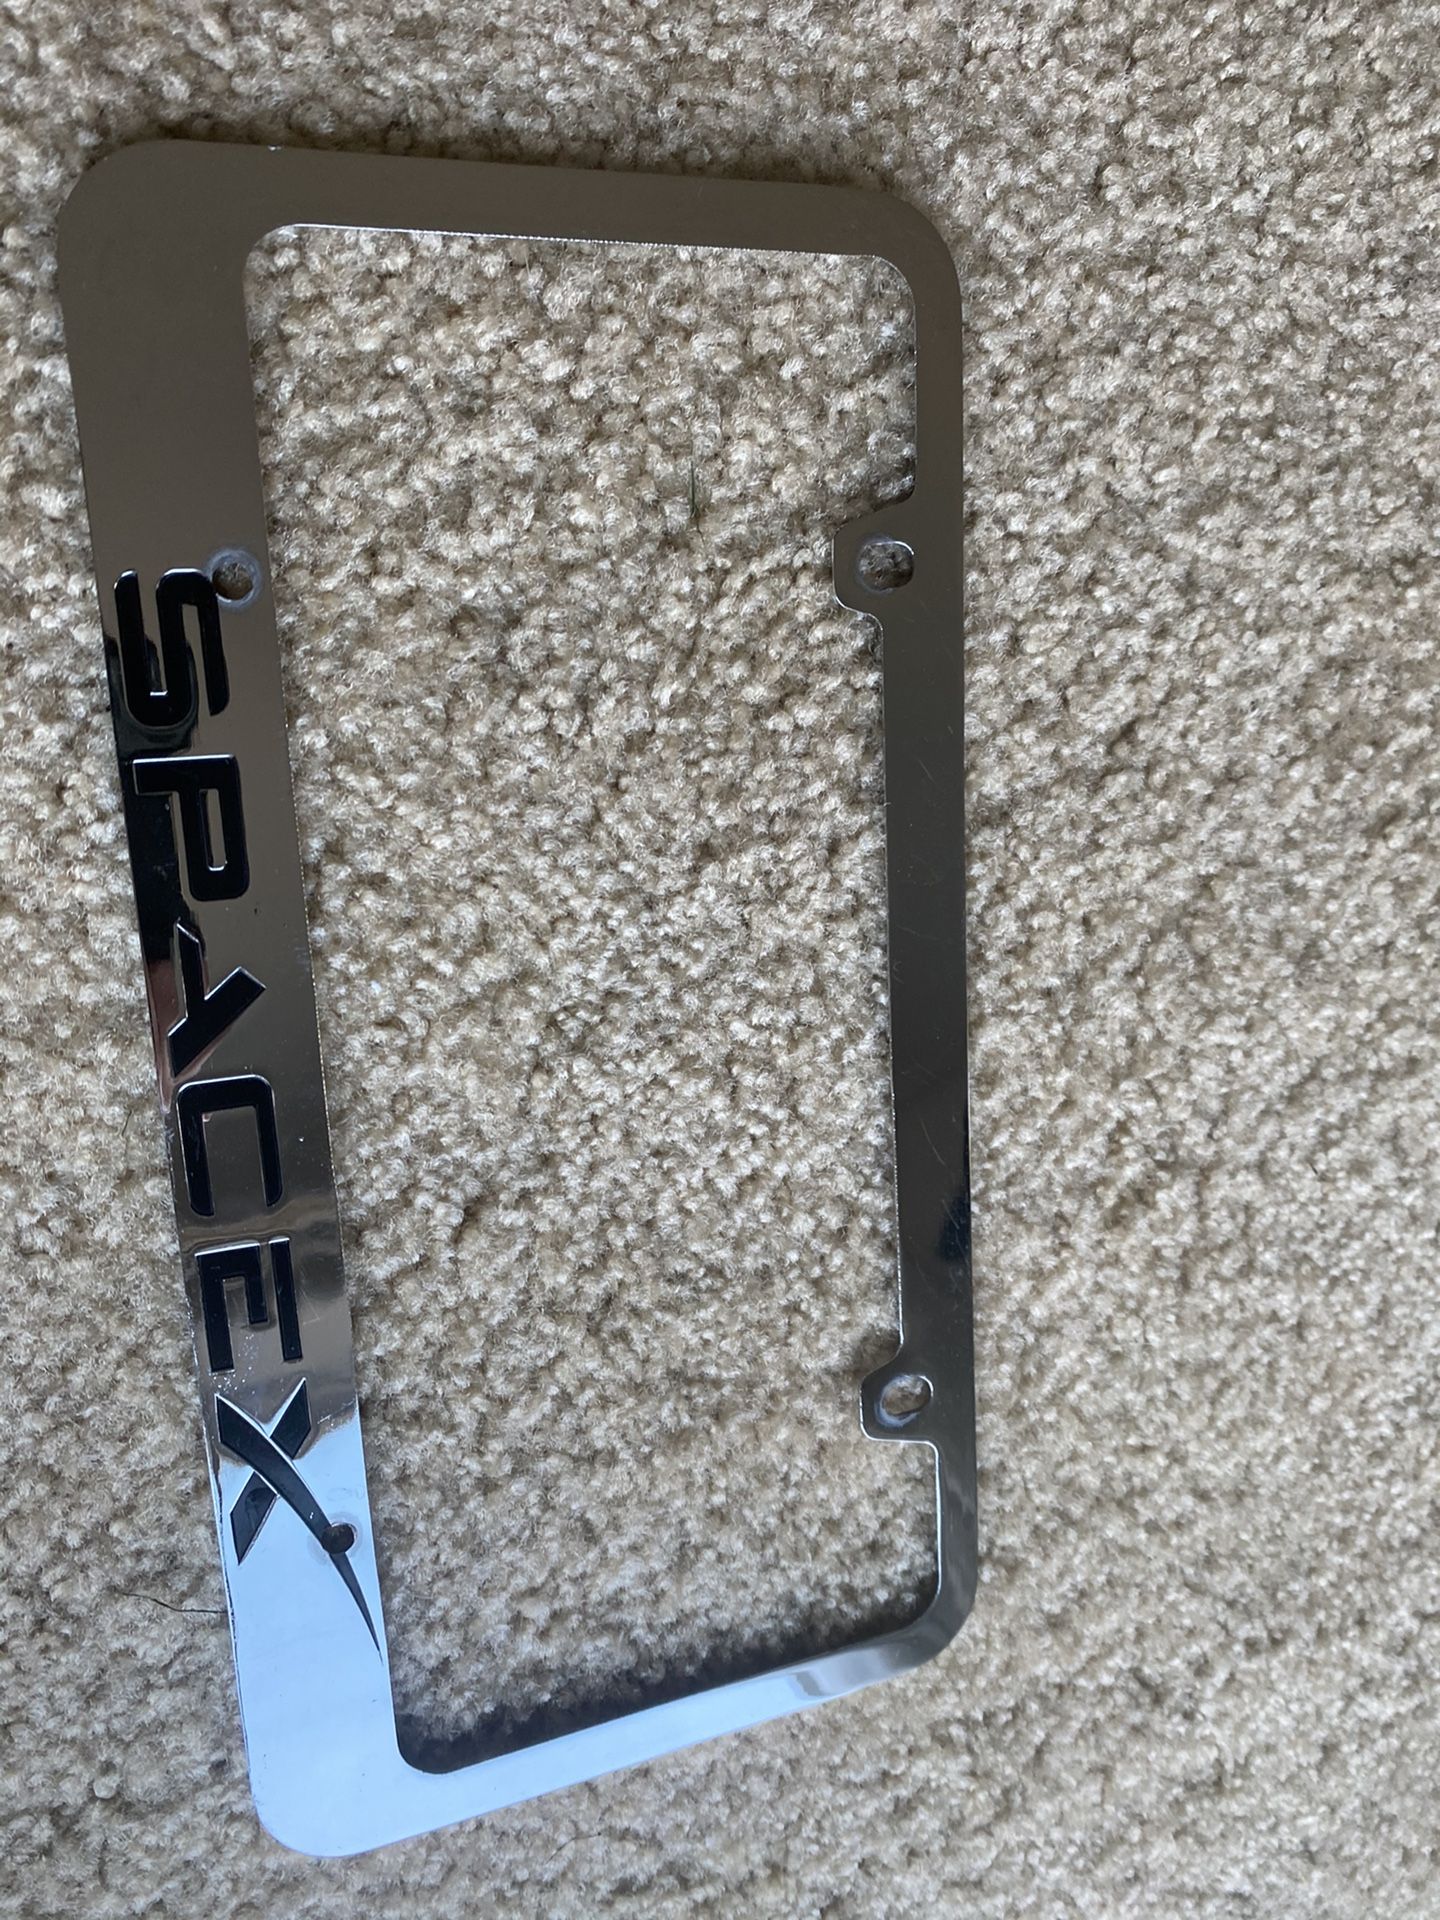 SpaceX license plate frame